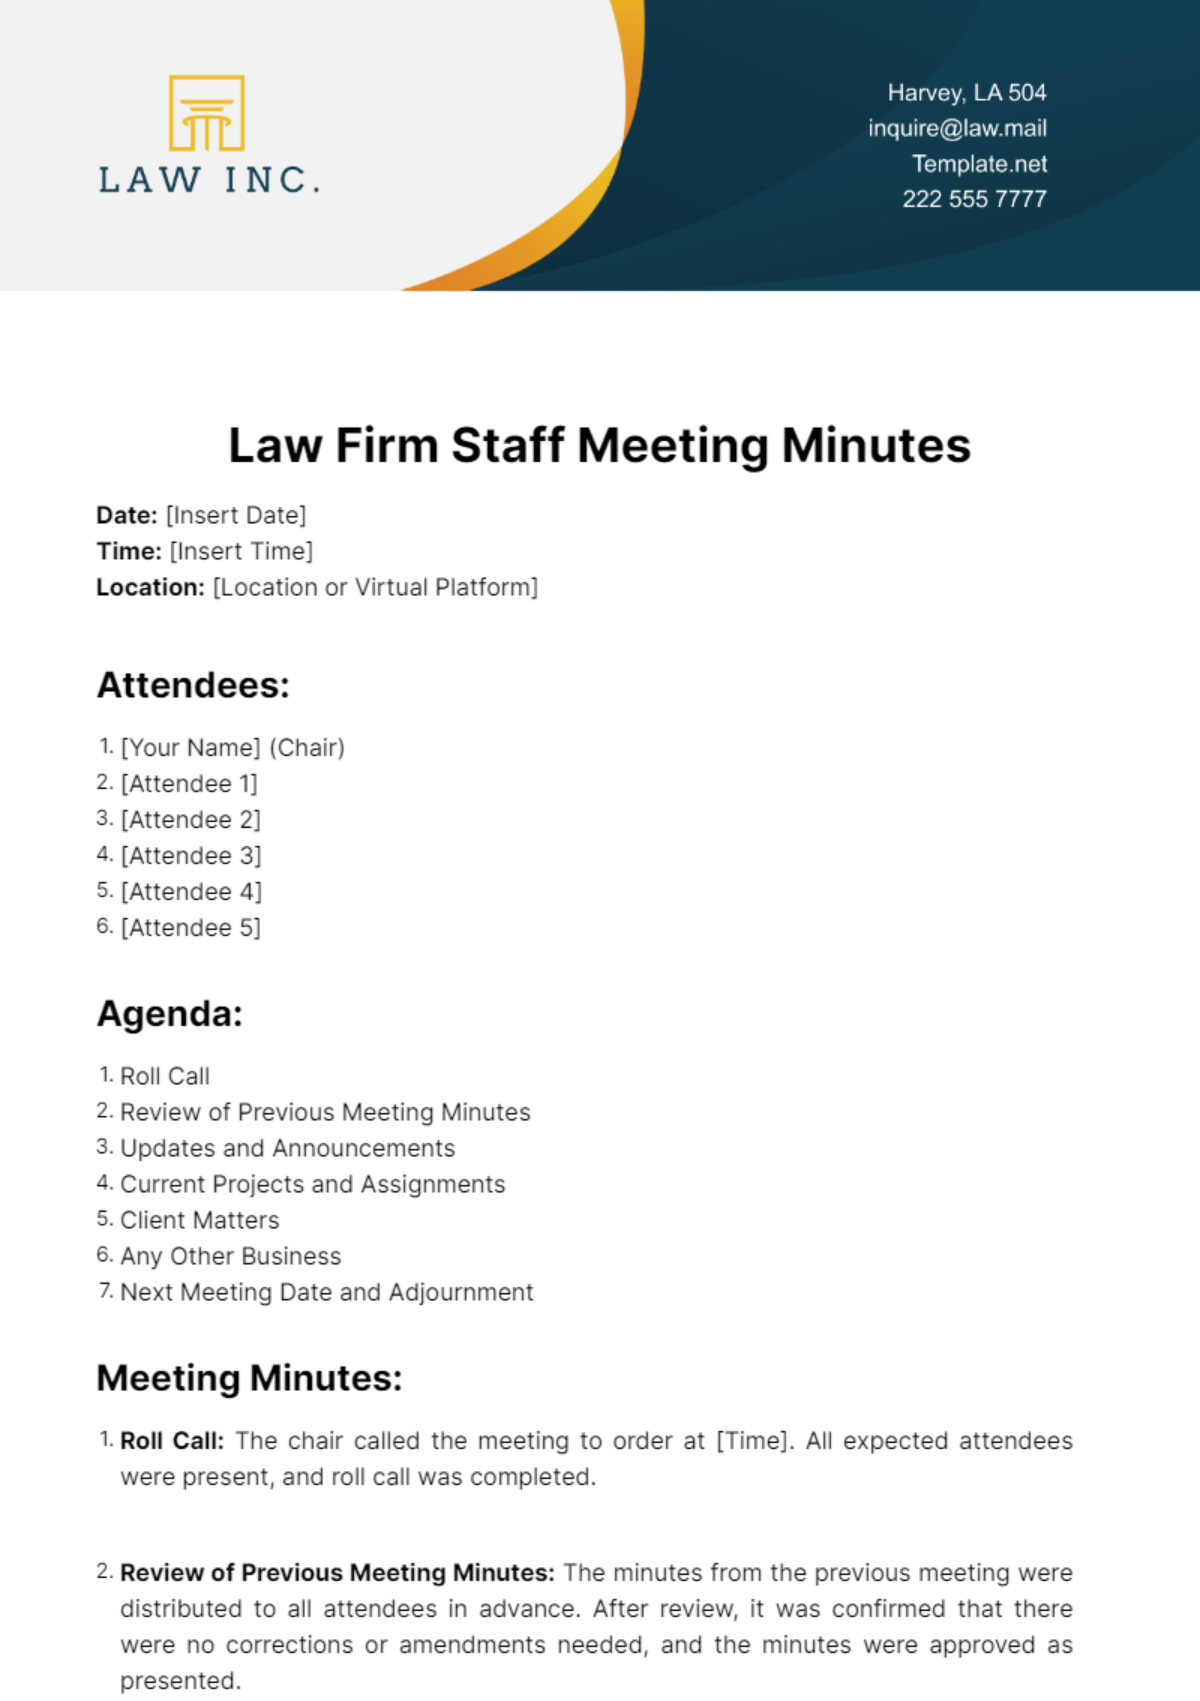 Free Law Firm Staff Meeting Minutes Template